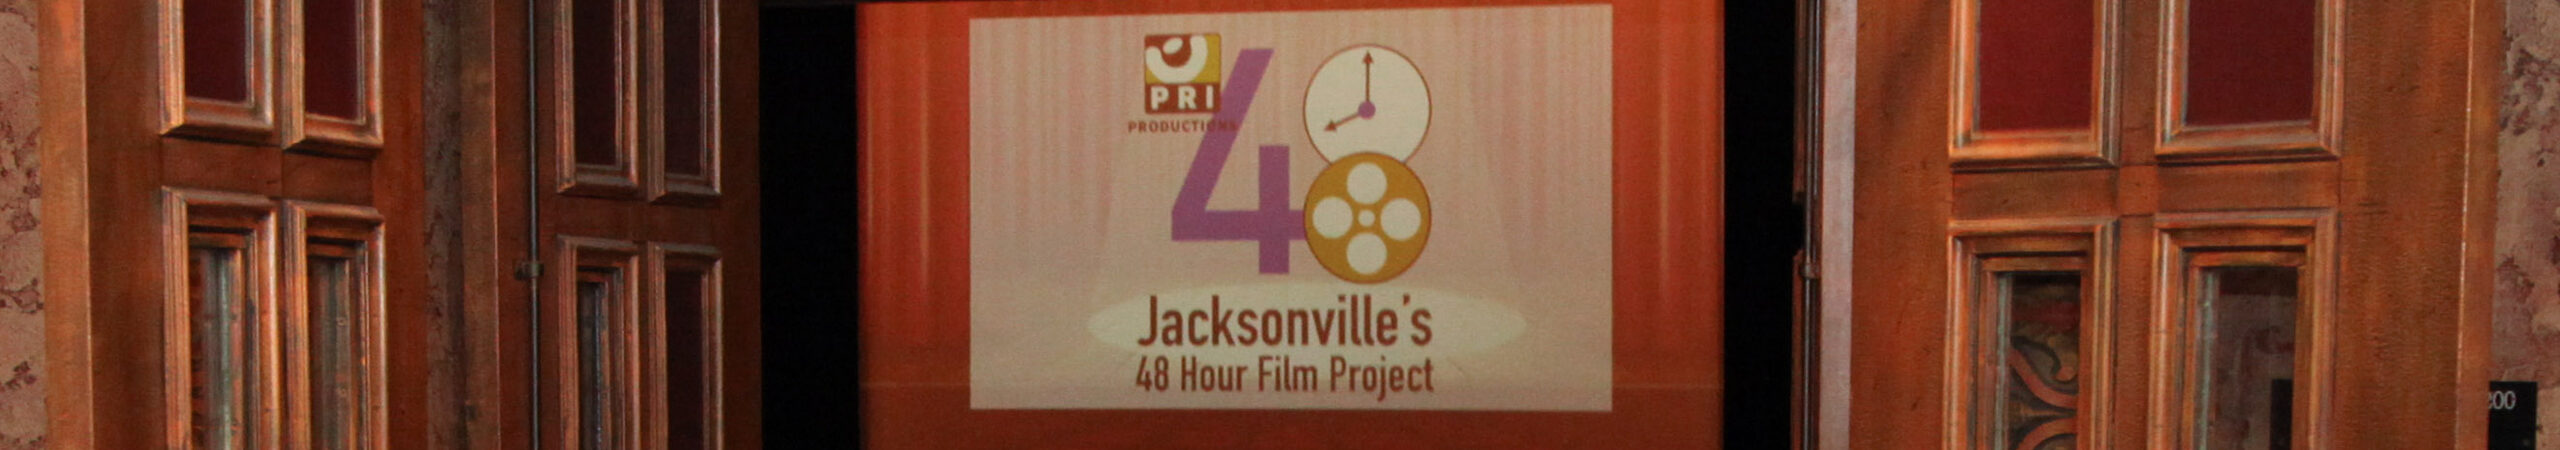 Jacksonville 48 Hour Film Project: Screening Group C